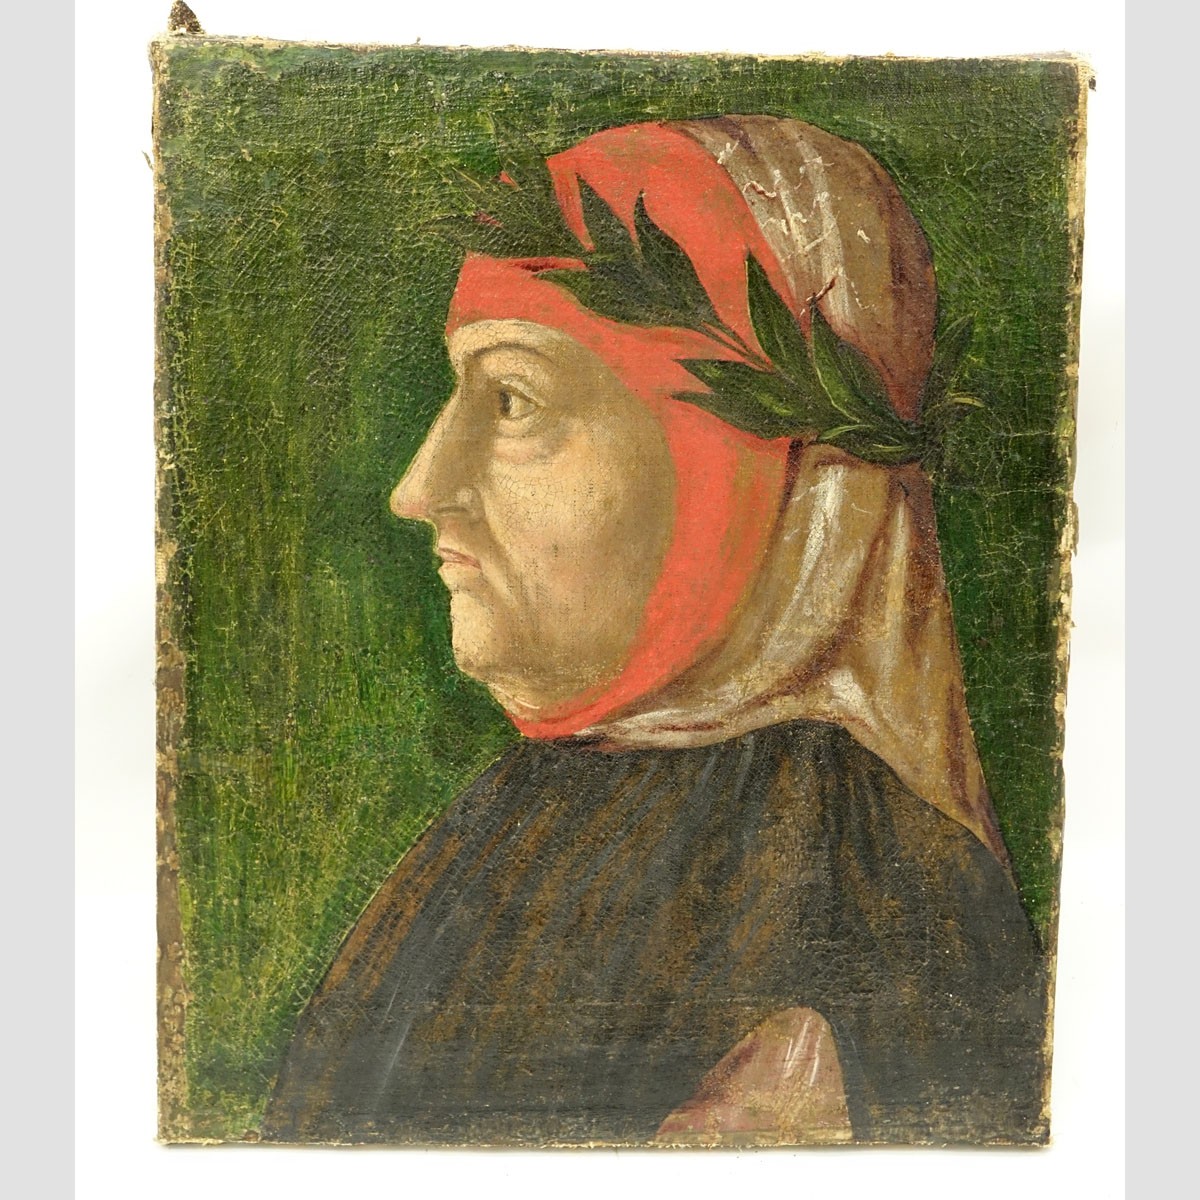 Follower of Masaccio, Italian (1401 - 1428) Oil on Canvas, Presumed Depiction of Filippo Brunelleschi, Unsigned. Conserved condition, heavy craquelure and paint loss, fading.